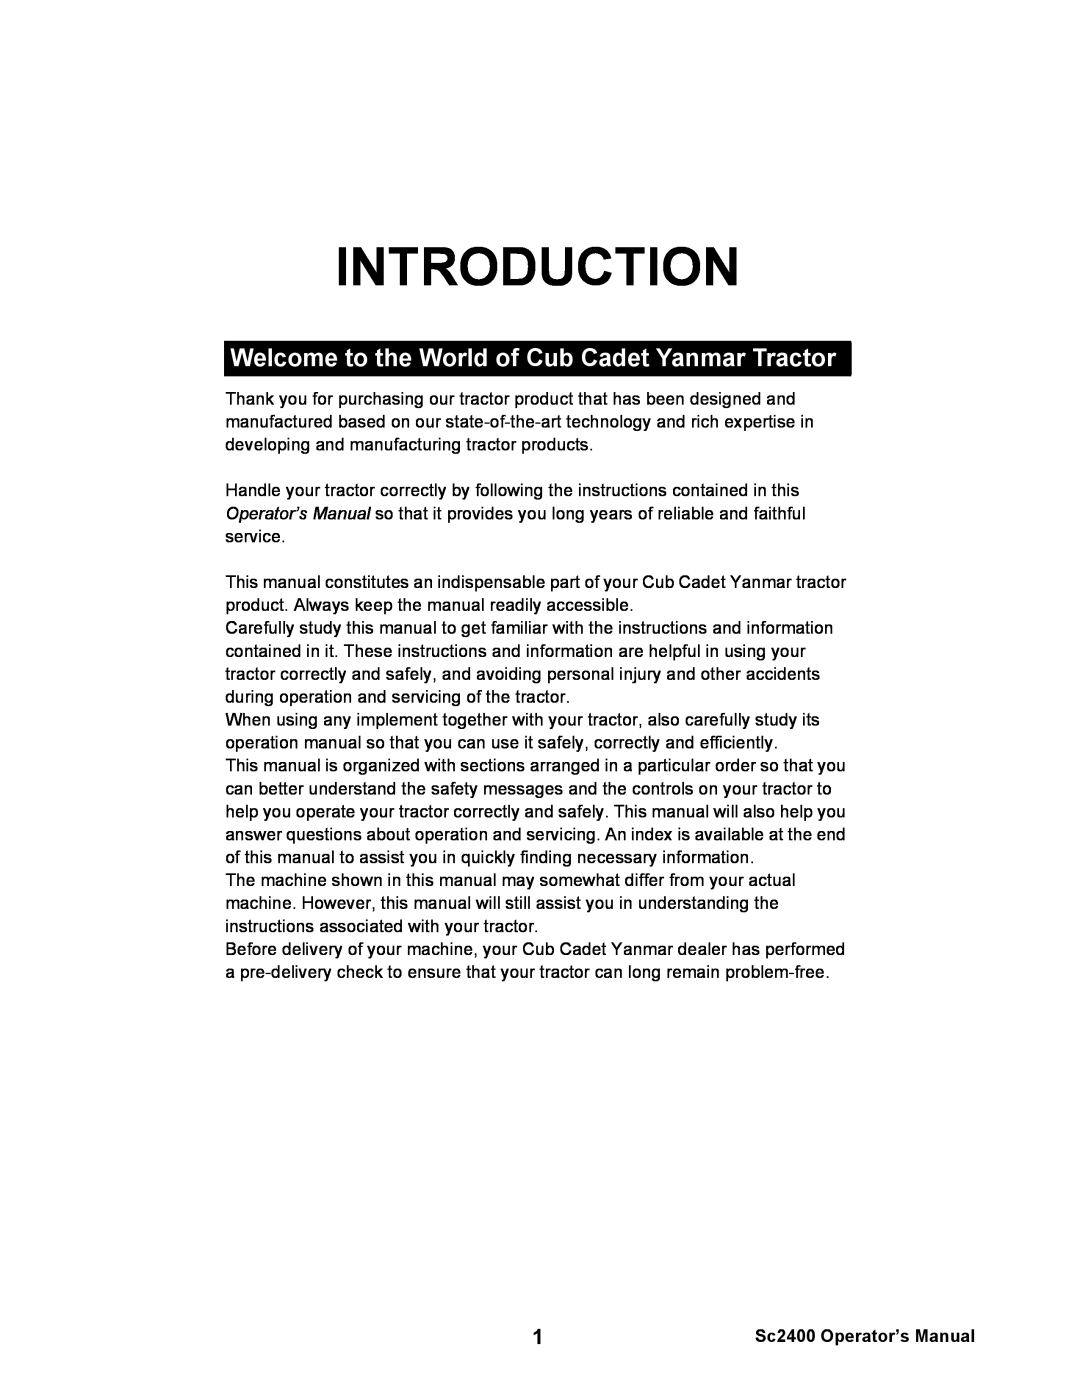 Cub Cadet SC2400 manual Introduction, Welcome to the World of Cub Cadet Yanmar Tractor, Sc2400 Operator’s Manual 